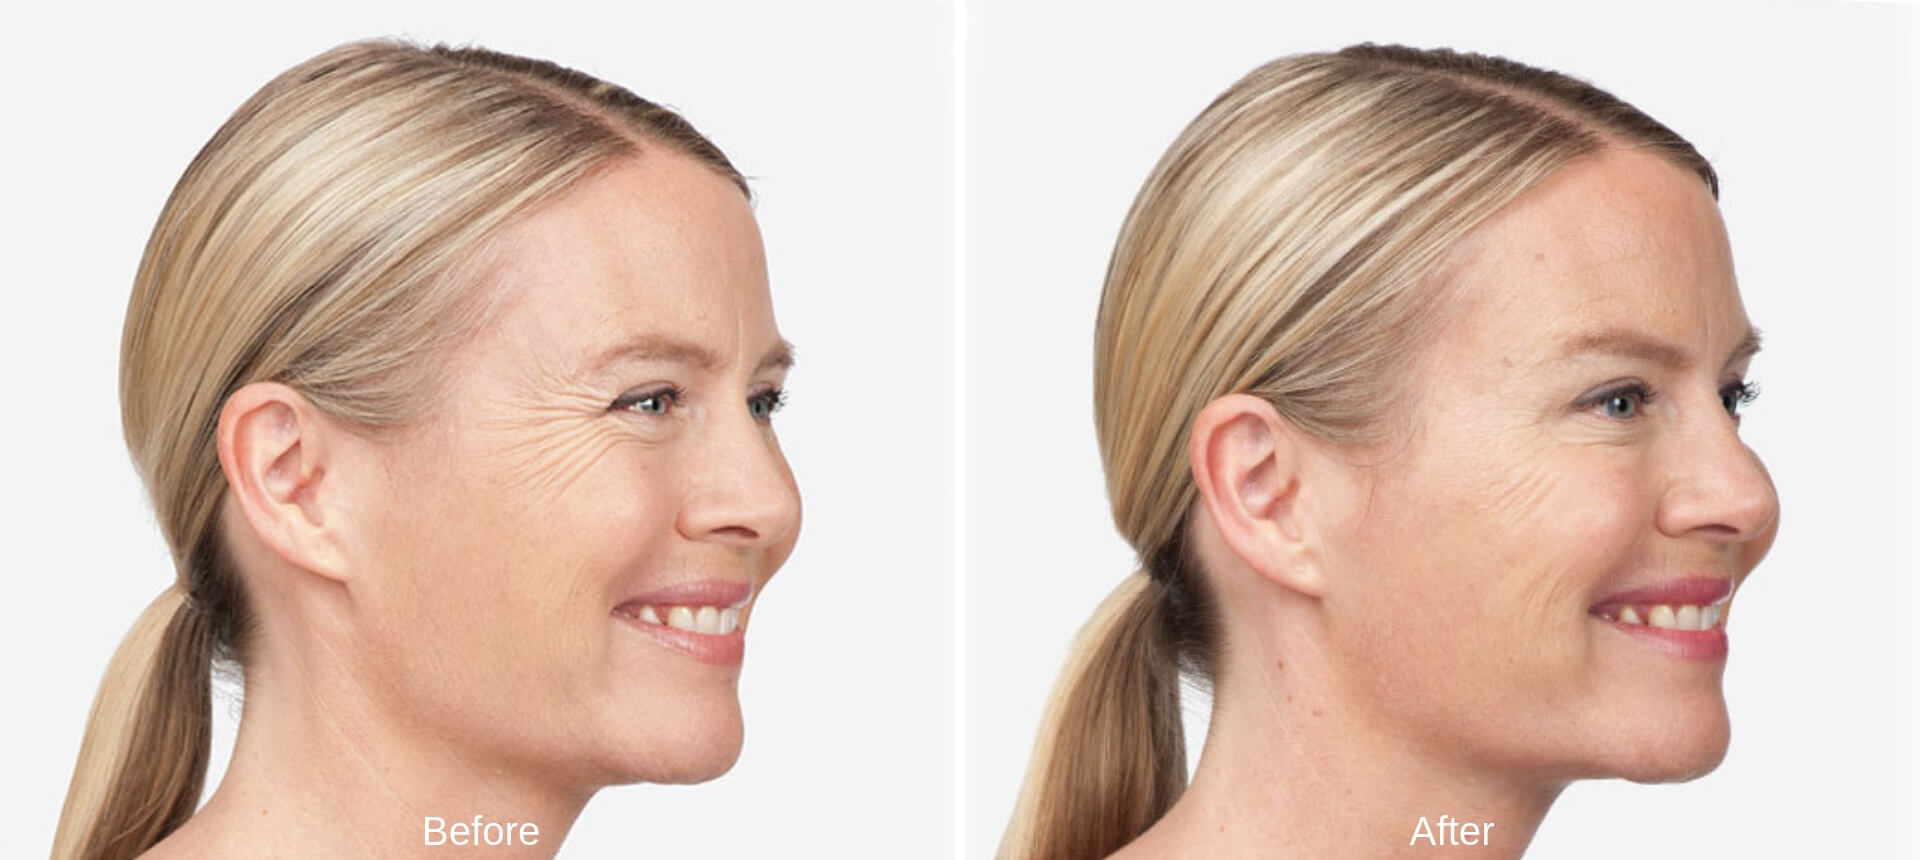 Womans before and after results from Botox.